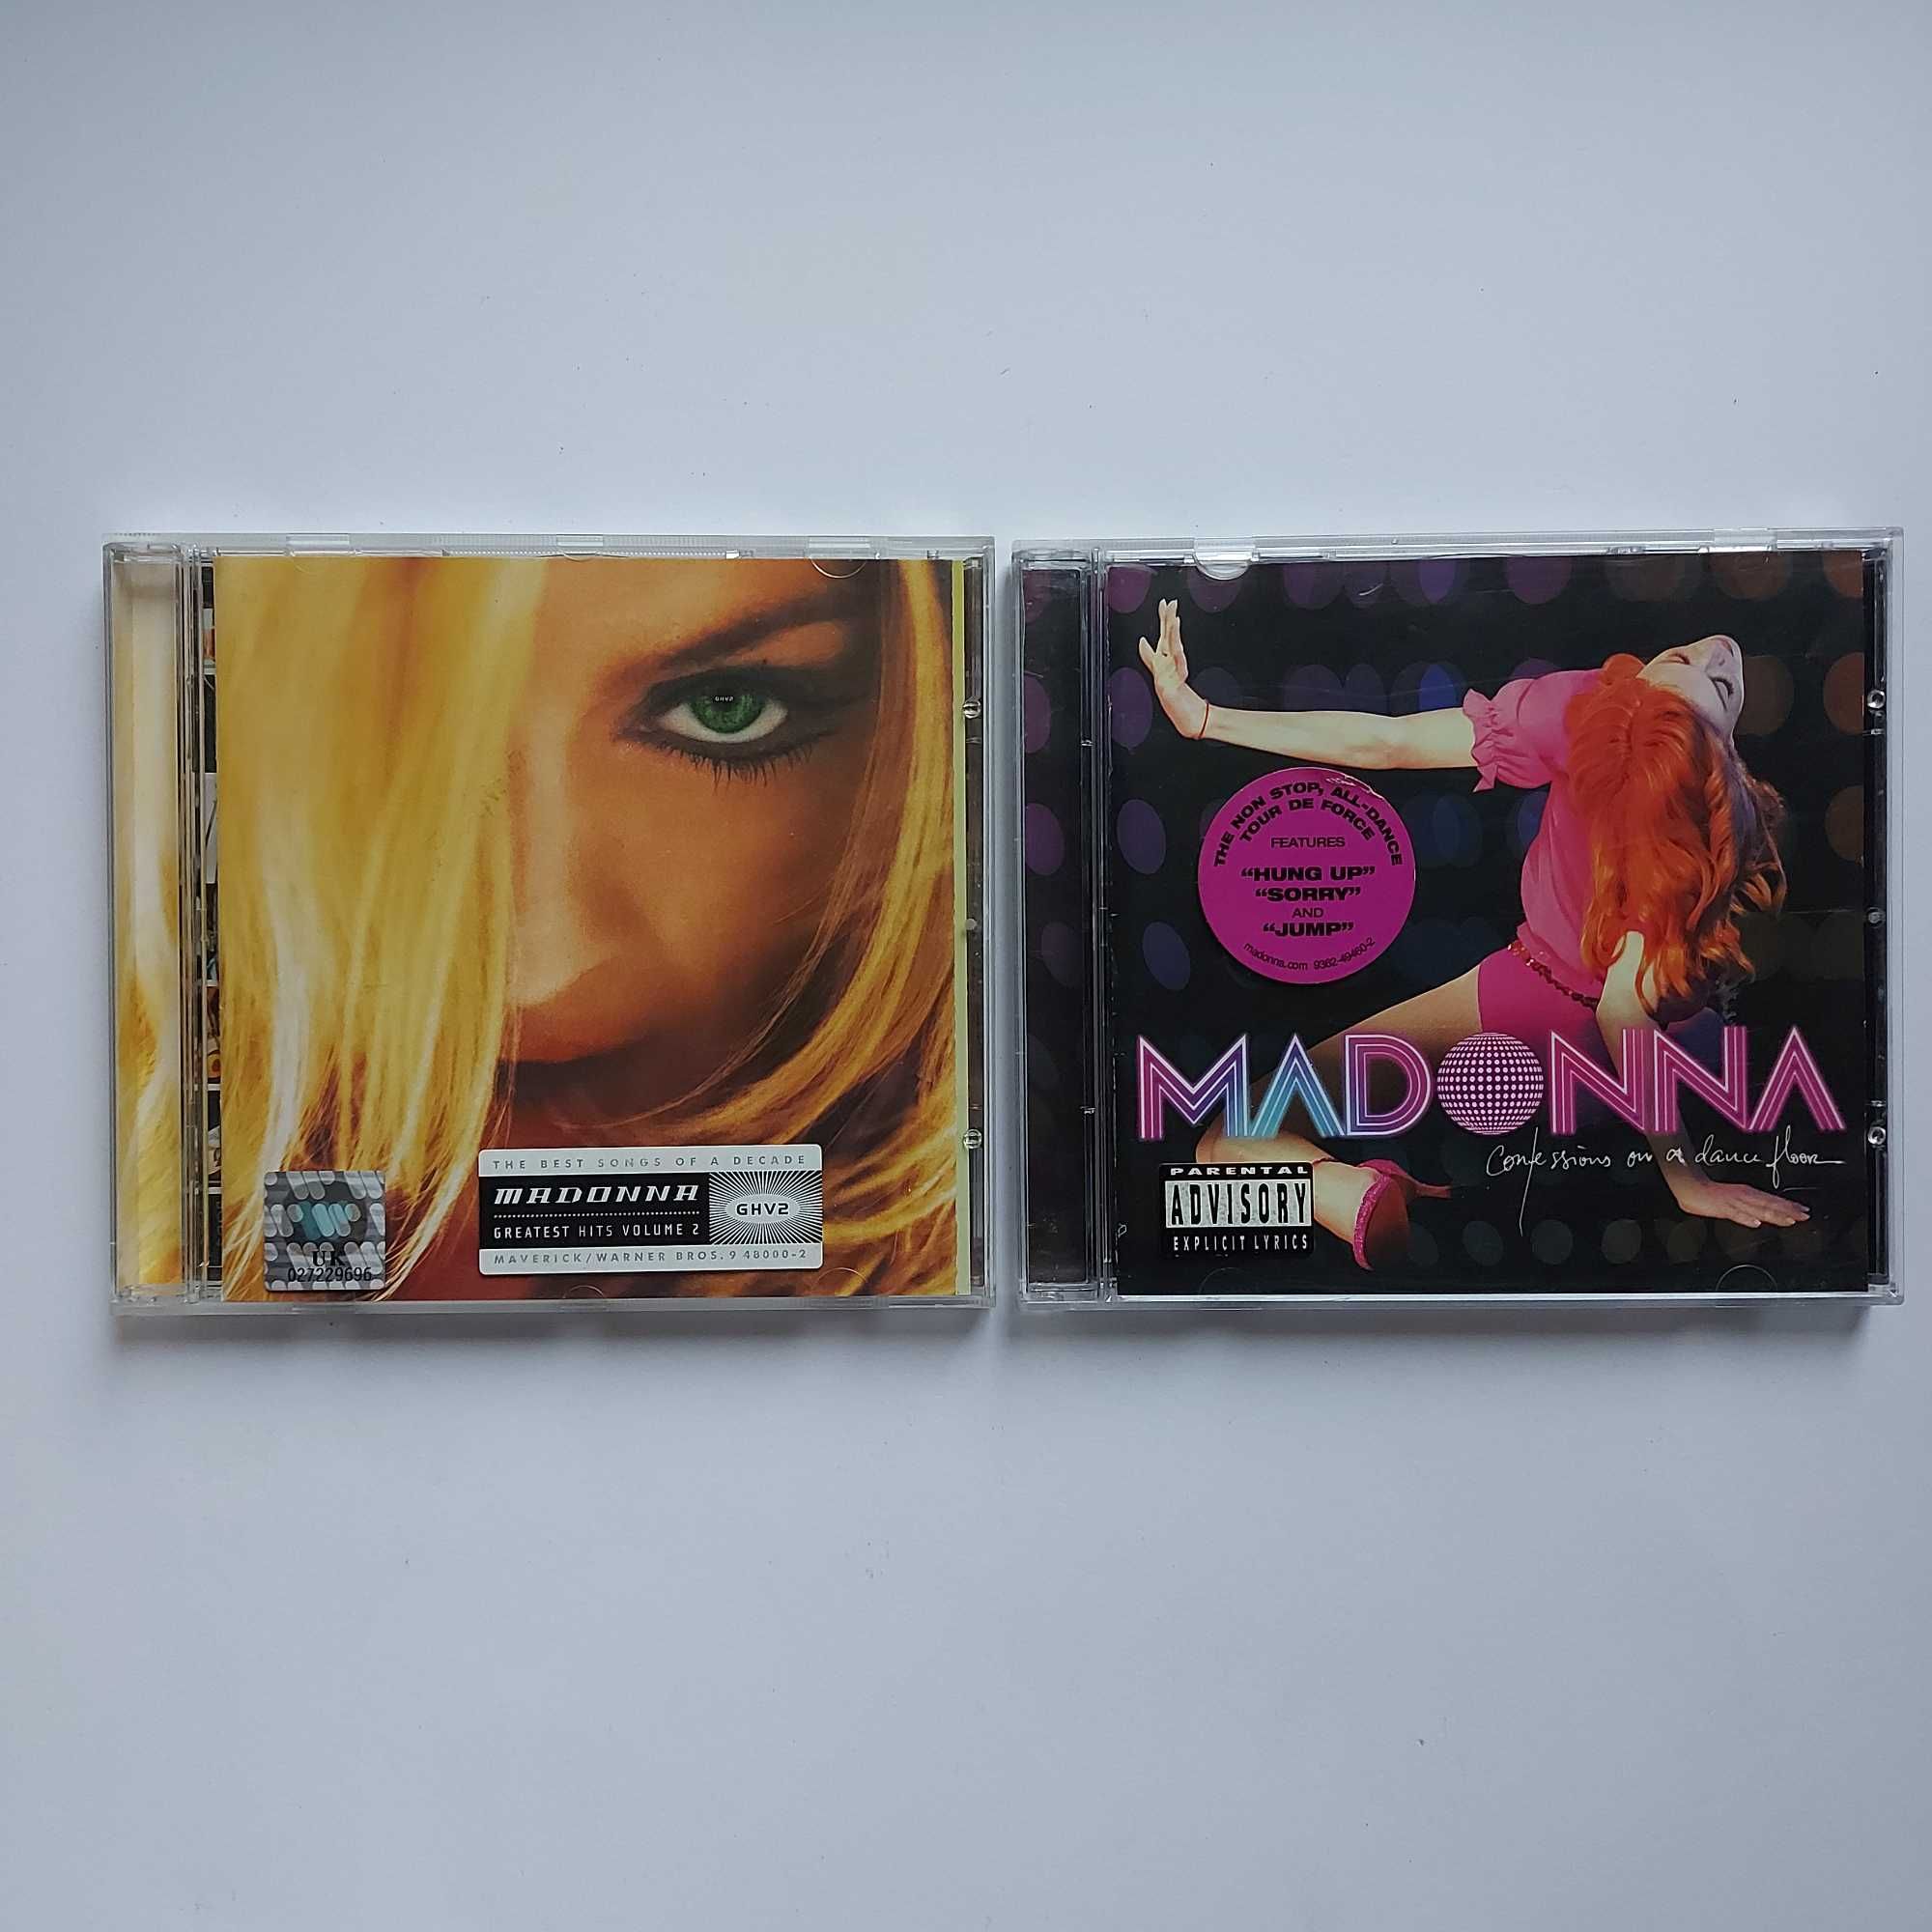 CD Madonna - Confessions on a Dance Floor. Greatest Hits Volume 2